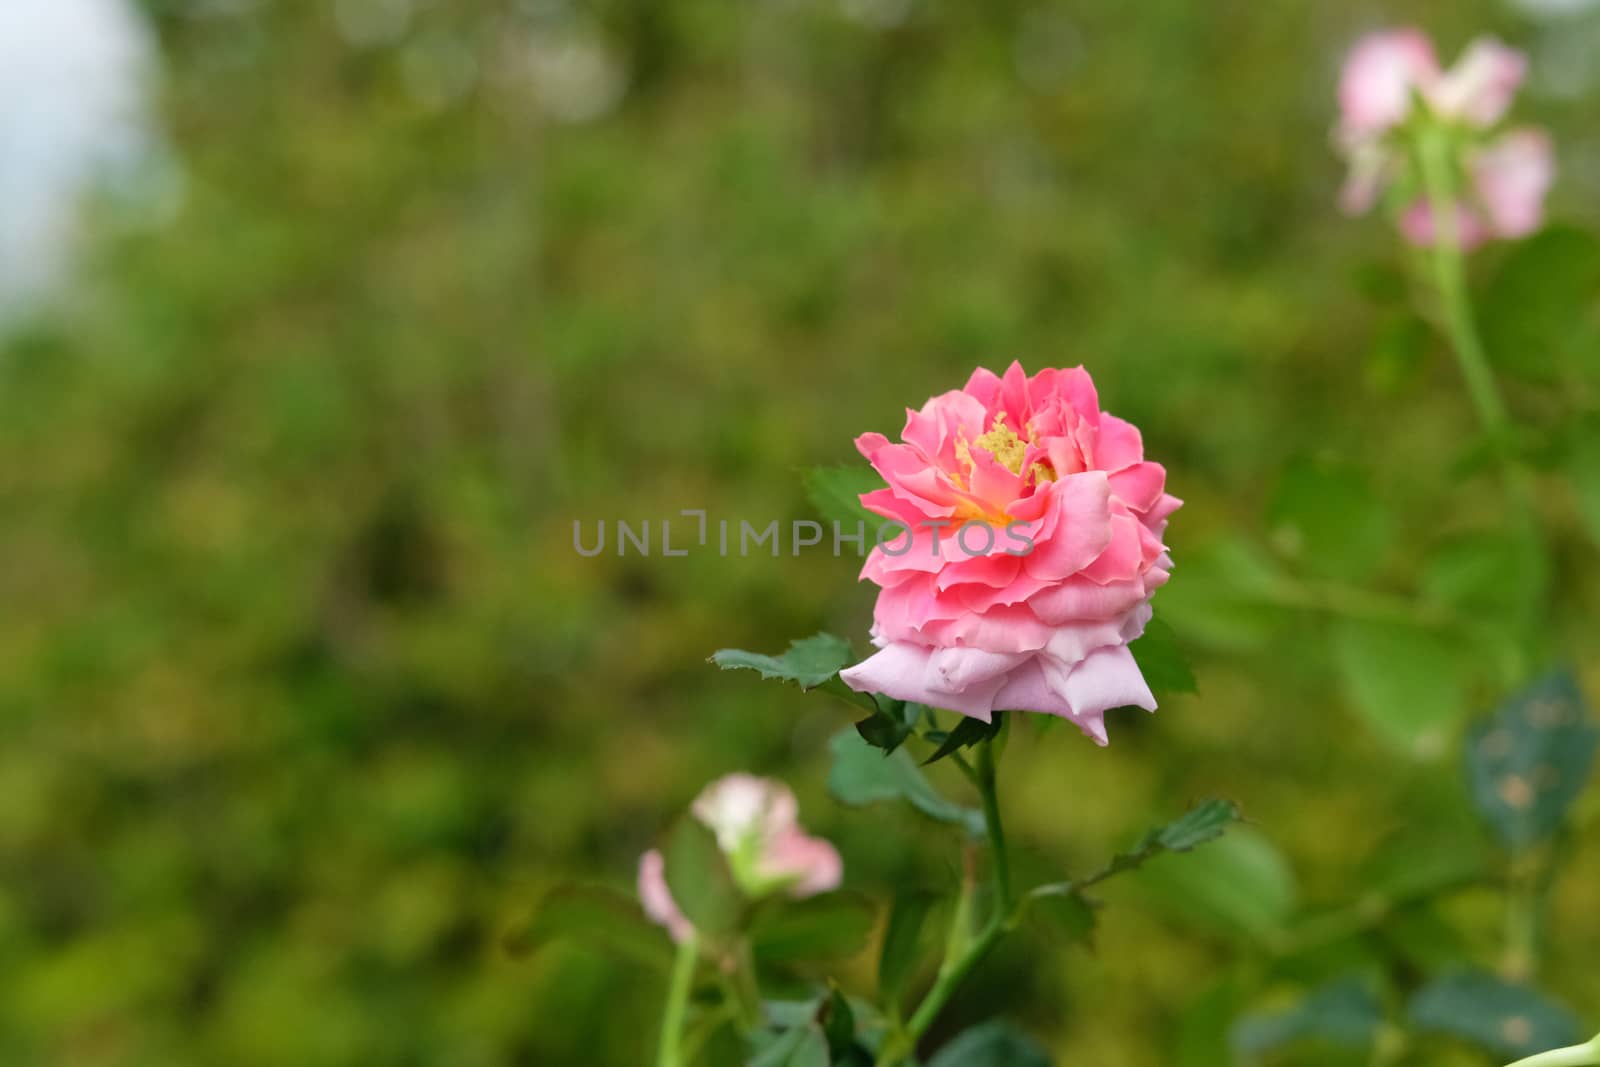 pink rose flower with dreamy green background by Macrostud